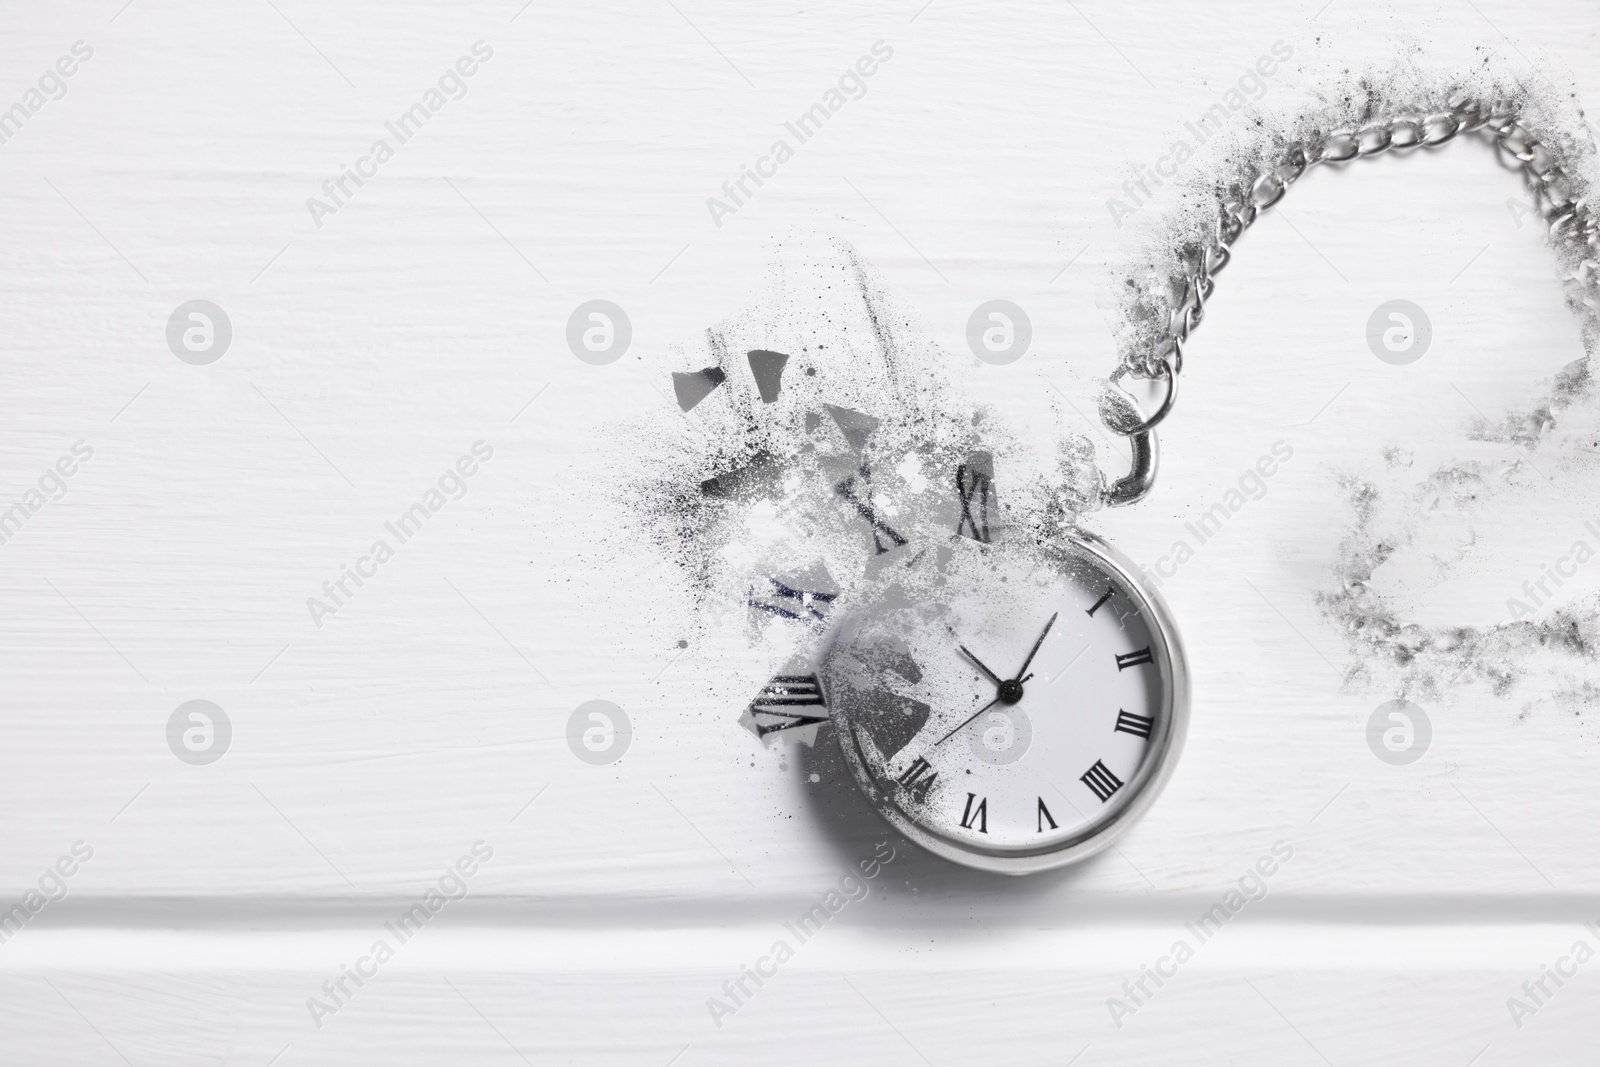 Image of Vintage pocket watch with chain dissolving on white wooden background, top view. Fleeting time